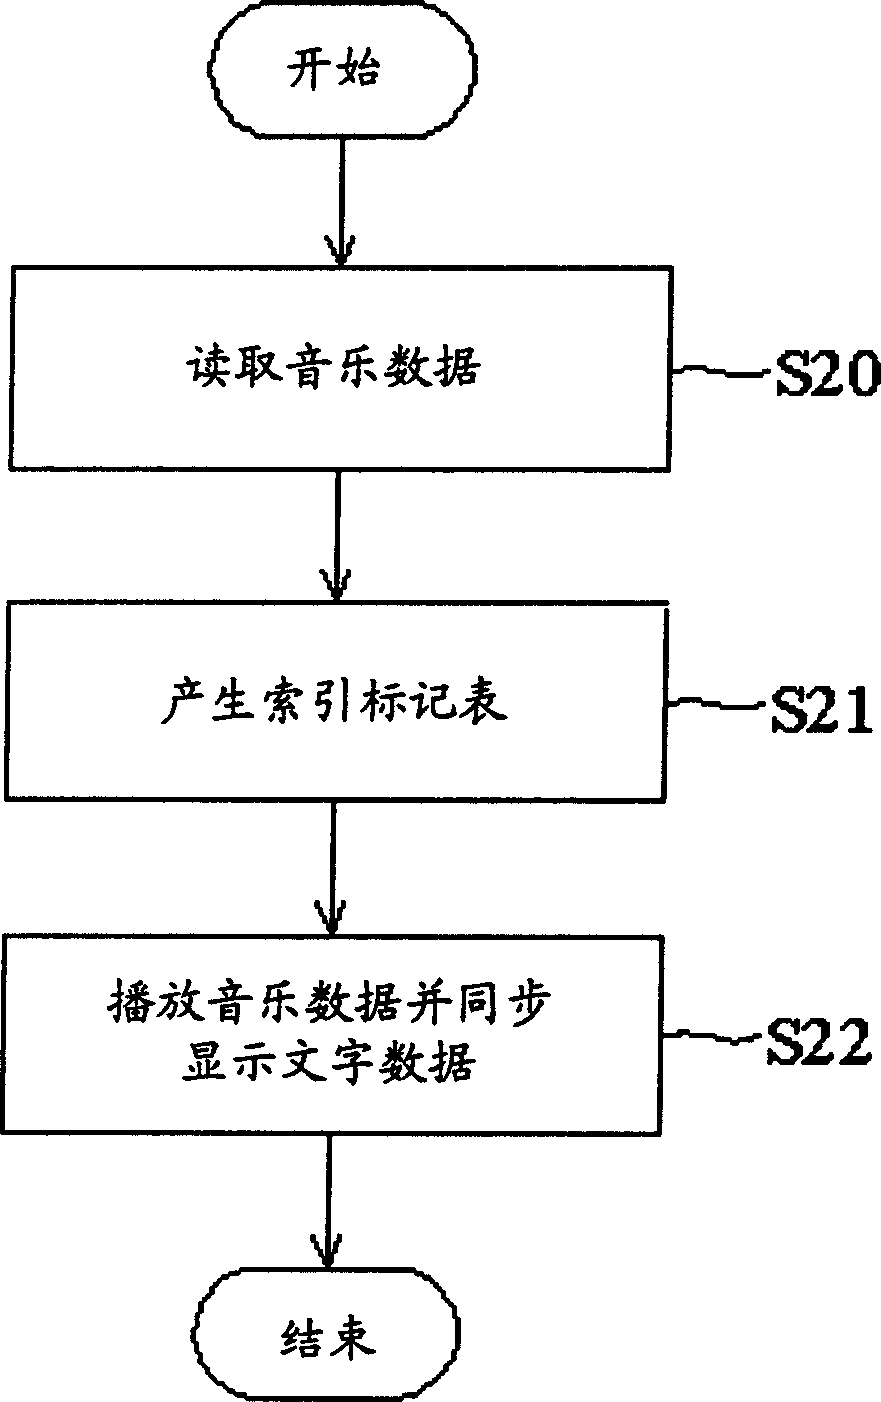 Data synchronous method definition data sychronous format method and memory medium